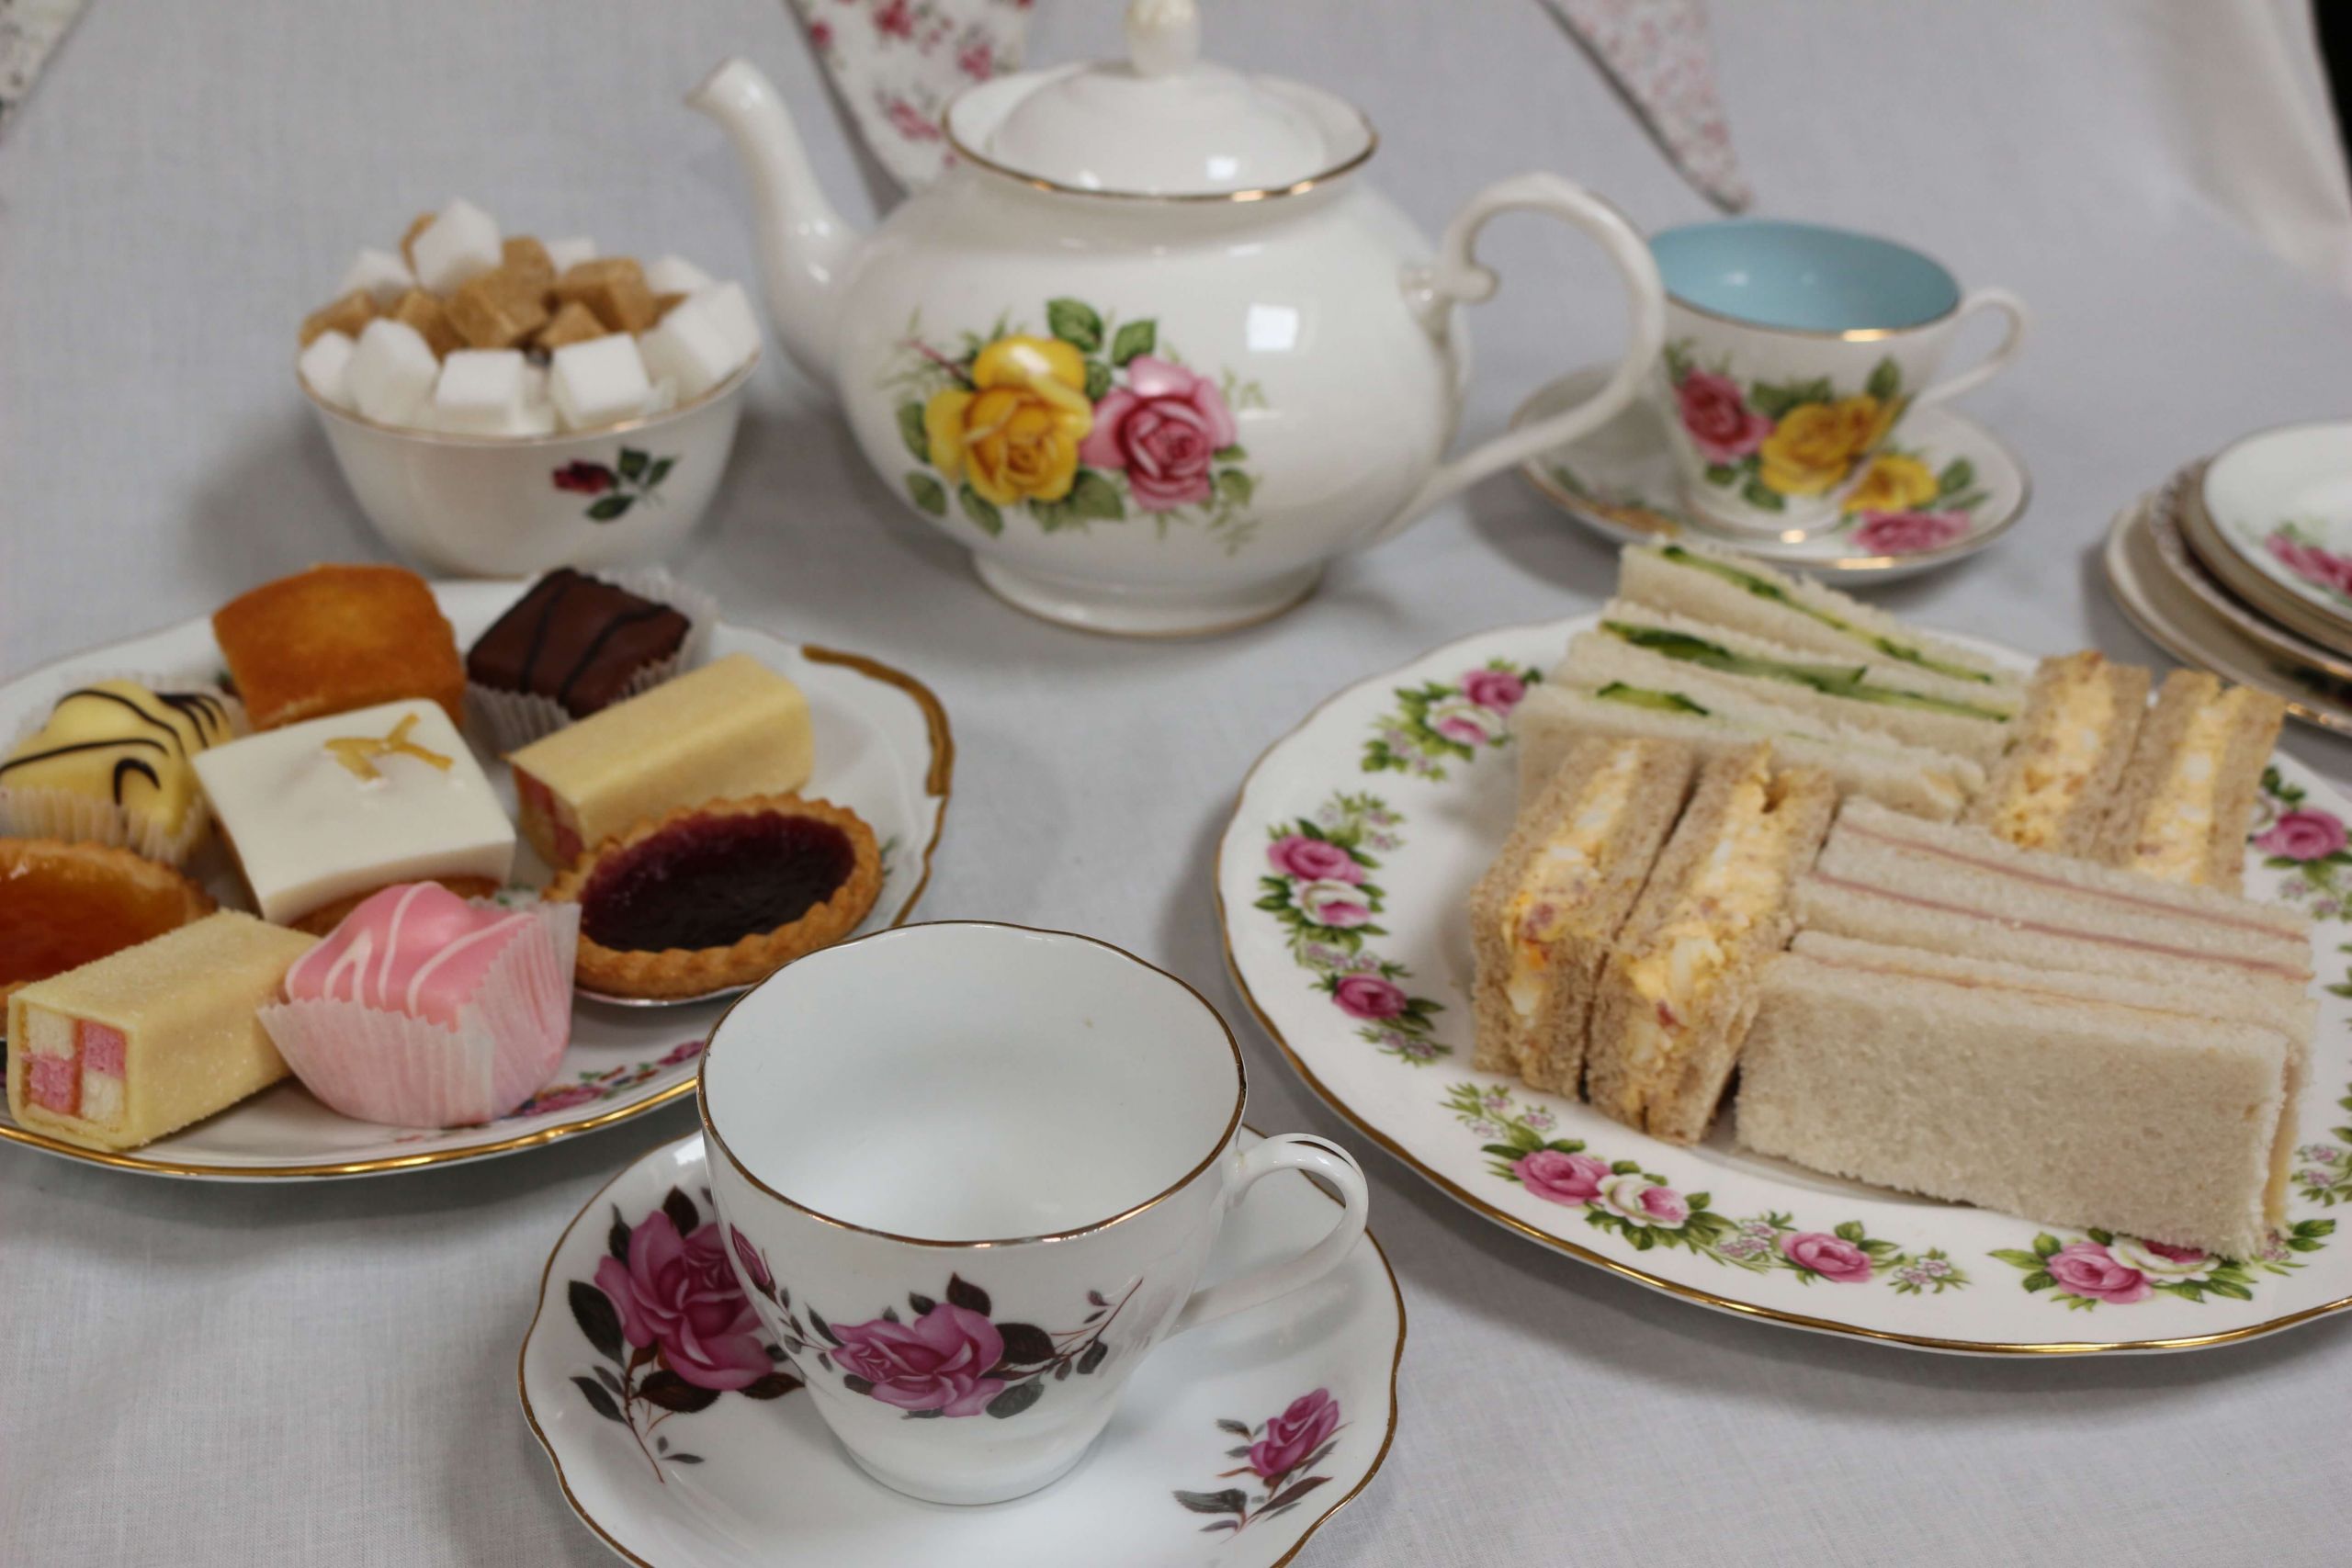 Afternoon Tea Party Ideas
 10 Ideas to make your Afternoon Tea Party extra special